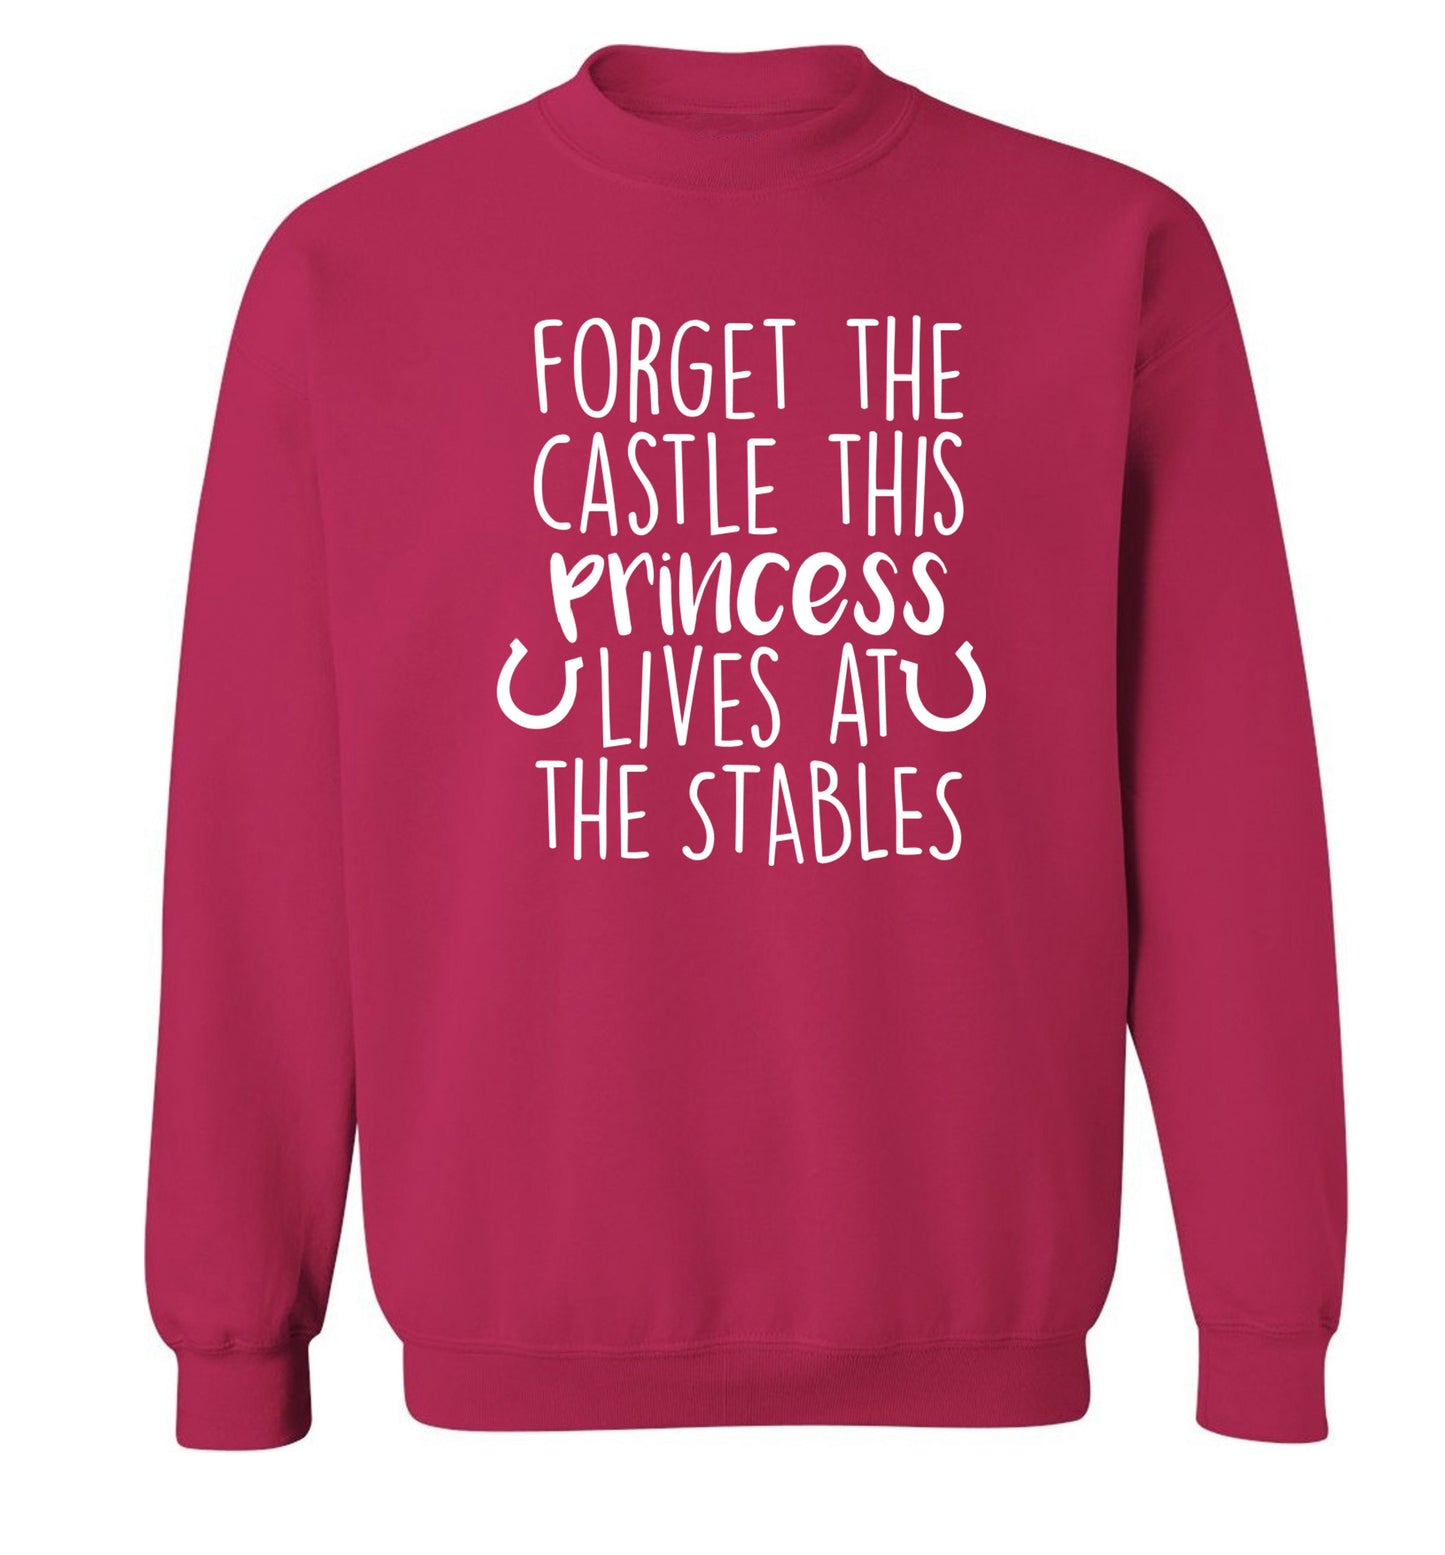 Forget the castle this princess lives at the stables Adult's unisex pink Sweater 2XL